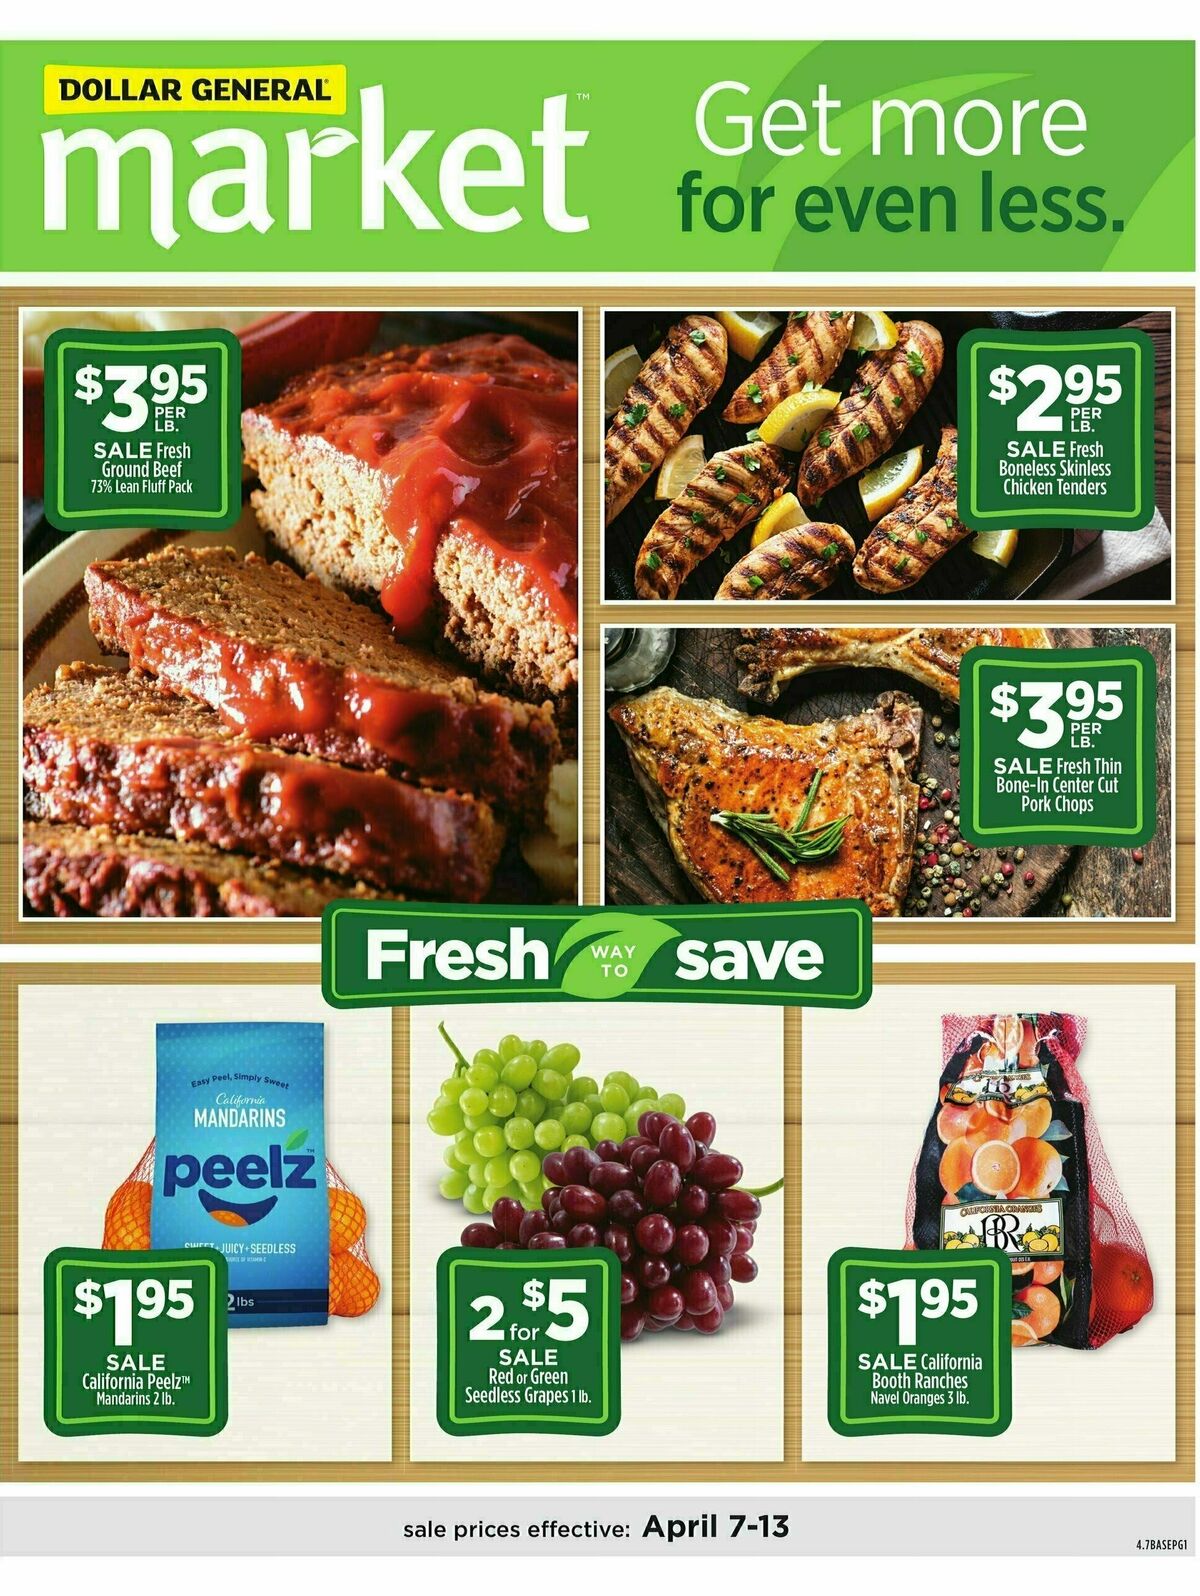 Dollar General Market Ad Weekly Ad from April 7